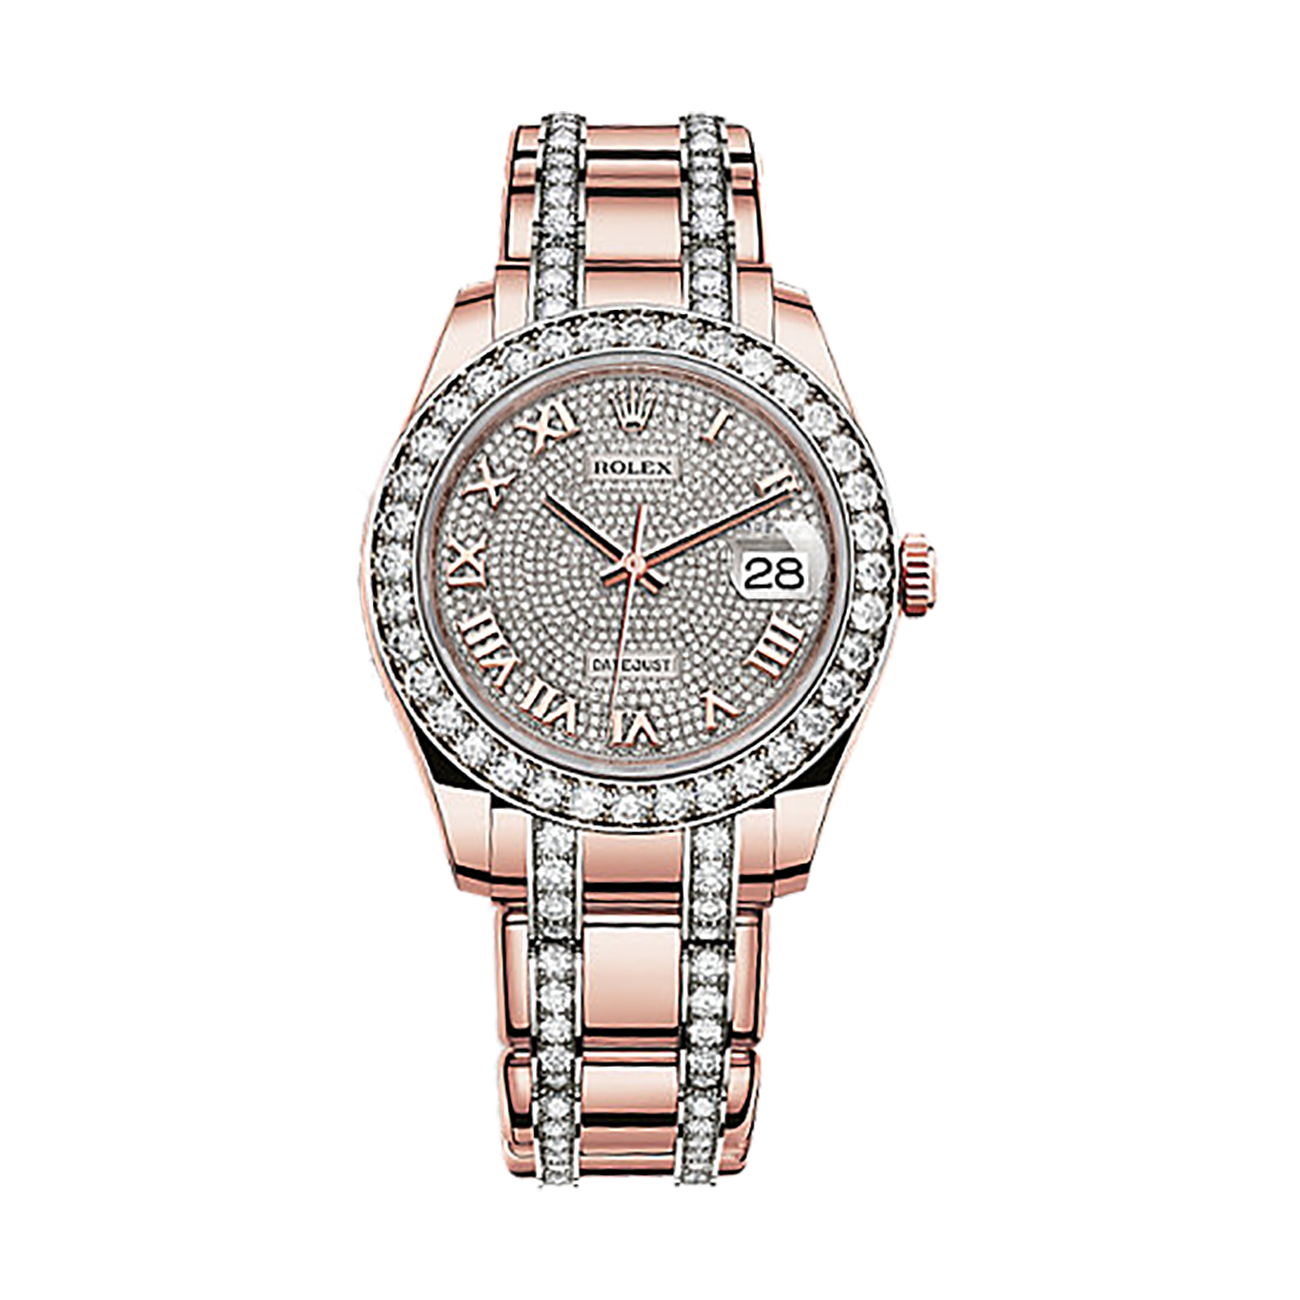 Pearlmaster 39 86285 Rose Gold & Diamonds Watch (18 ct Pink Gold Paved with 713 Diamonds)